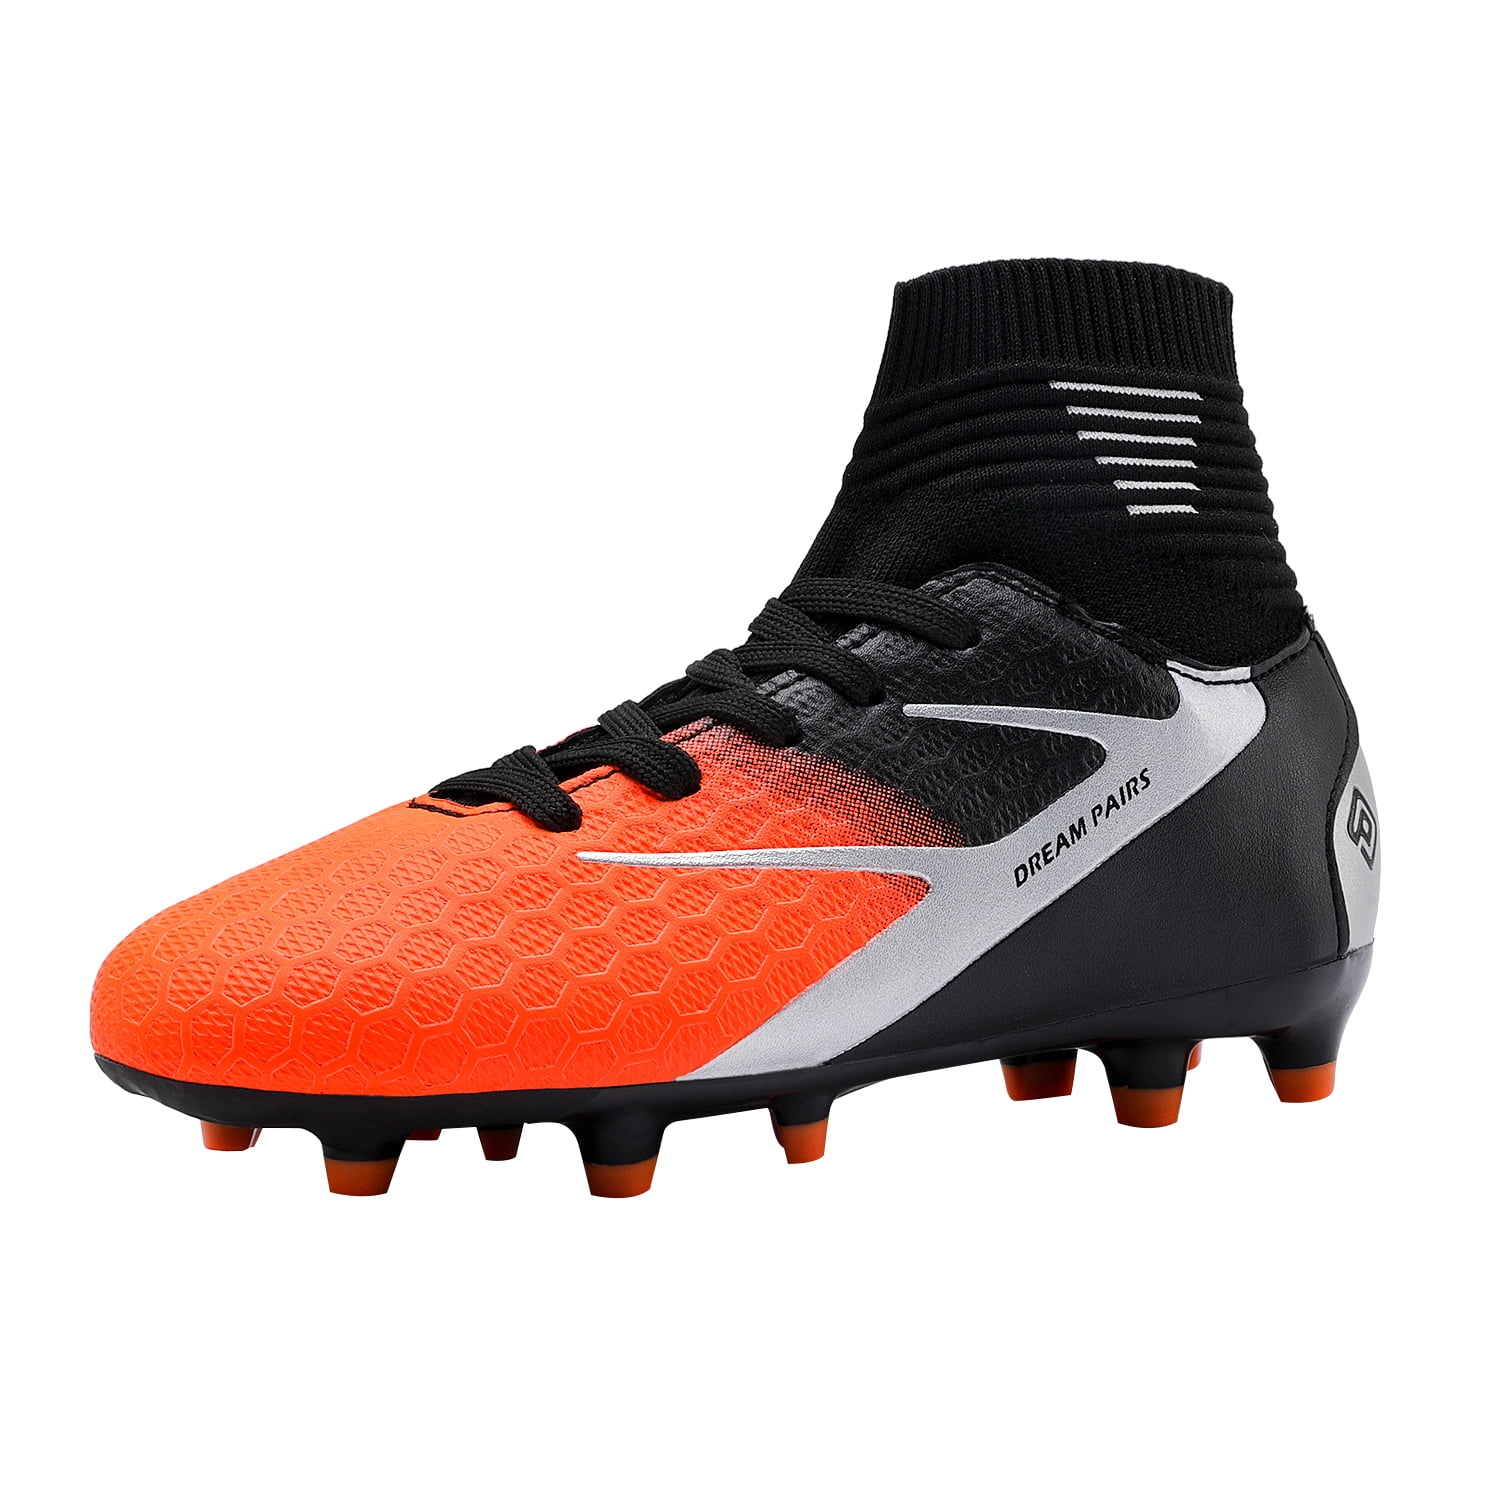 Toddler/Little Kid/Big Kid DREAM PAIRS Boys Girls HZ19006K Football Boots Soccer Cleats Shoes 